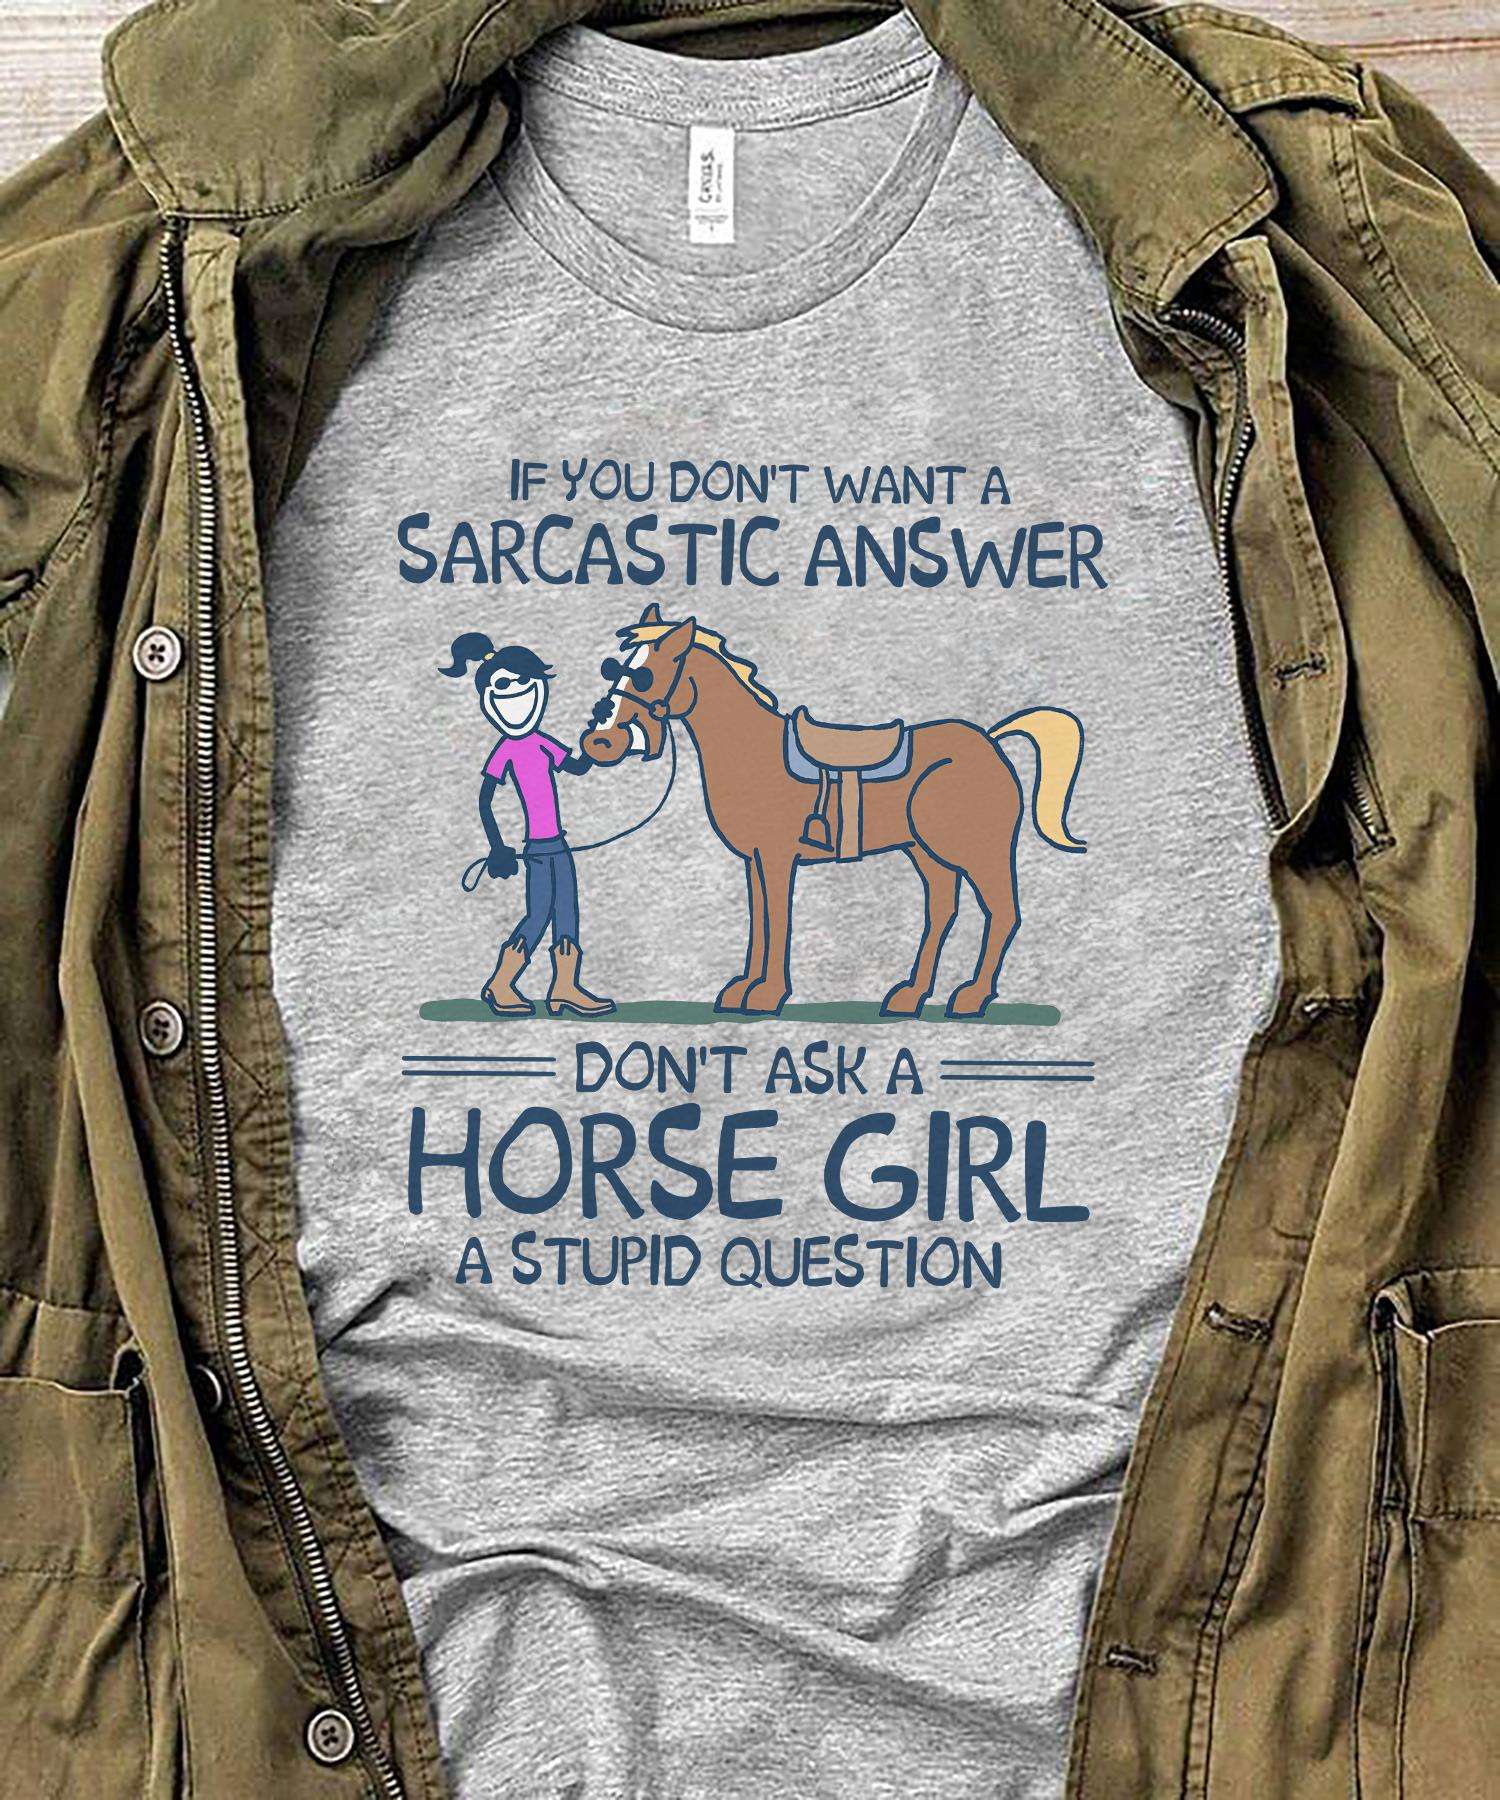 If you don't want a sarcastic answer don't ask a horse girl a stupid question - Girl loves horse